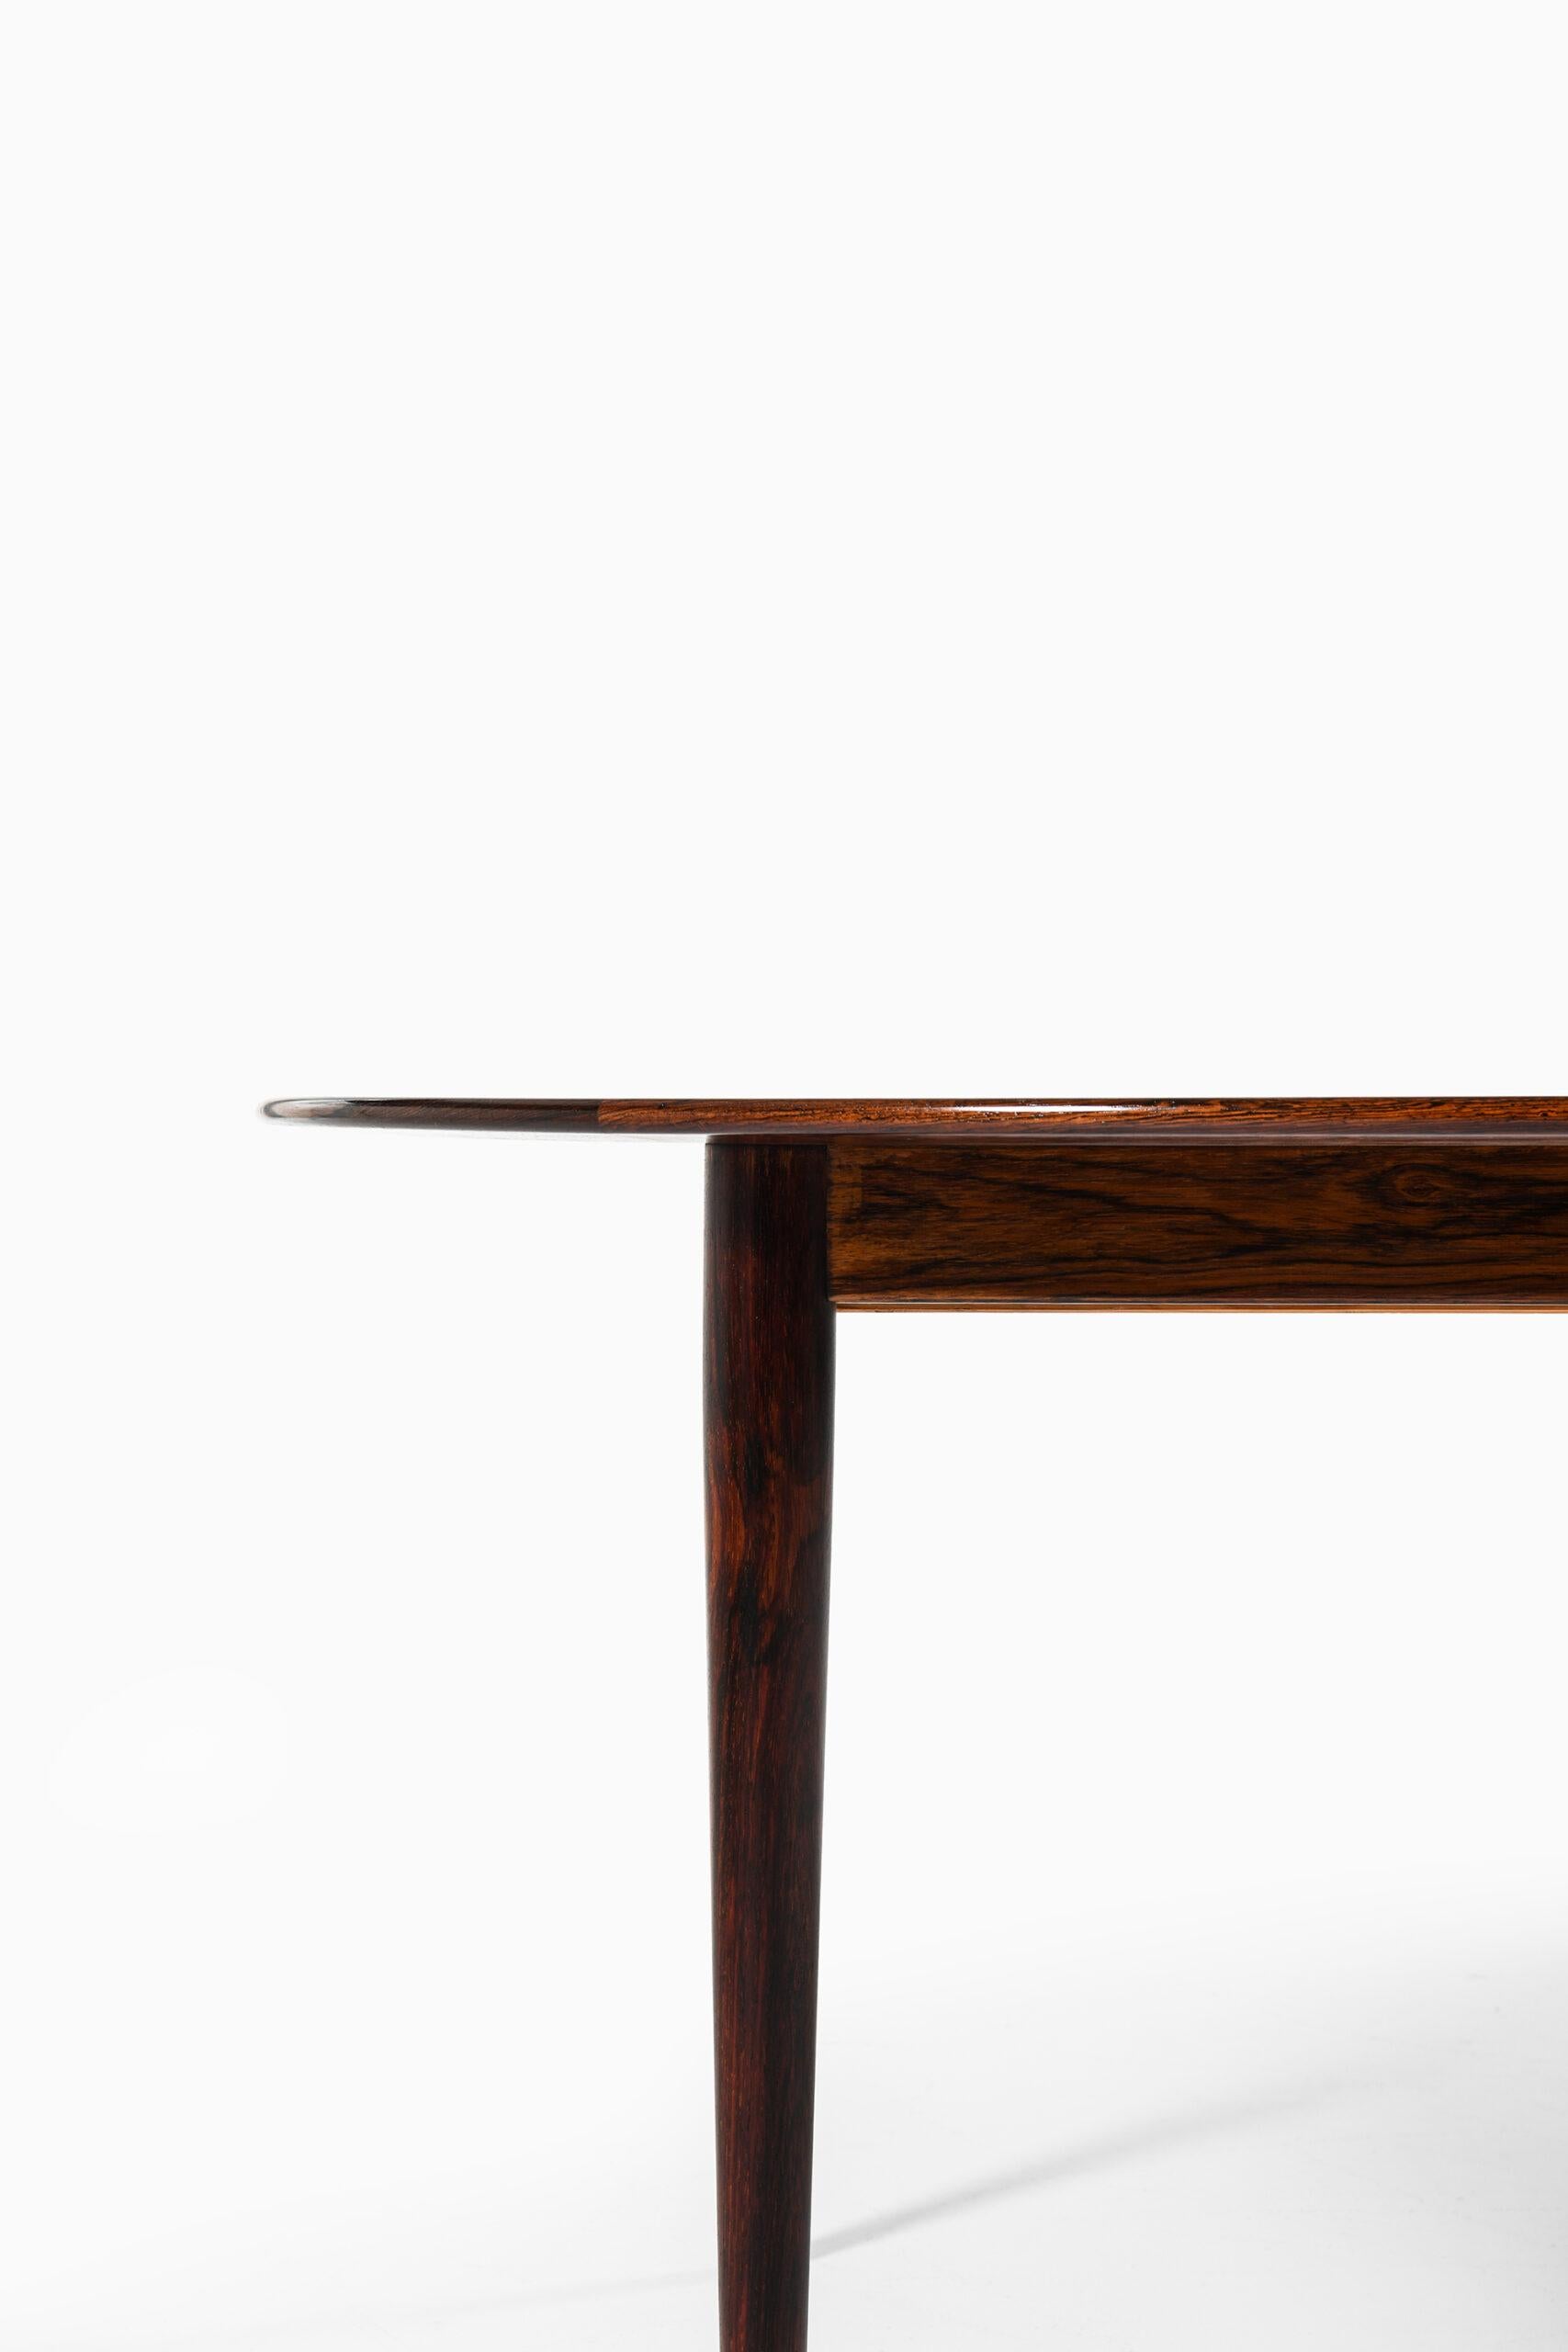 Formica Grete Jalk Dining Table Produced by P. Jeppesens Møbelfabrik in Denmark